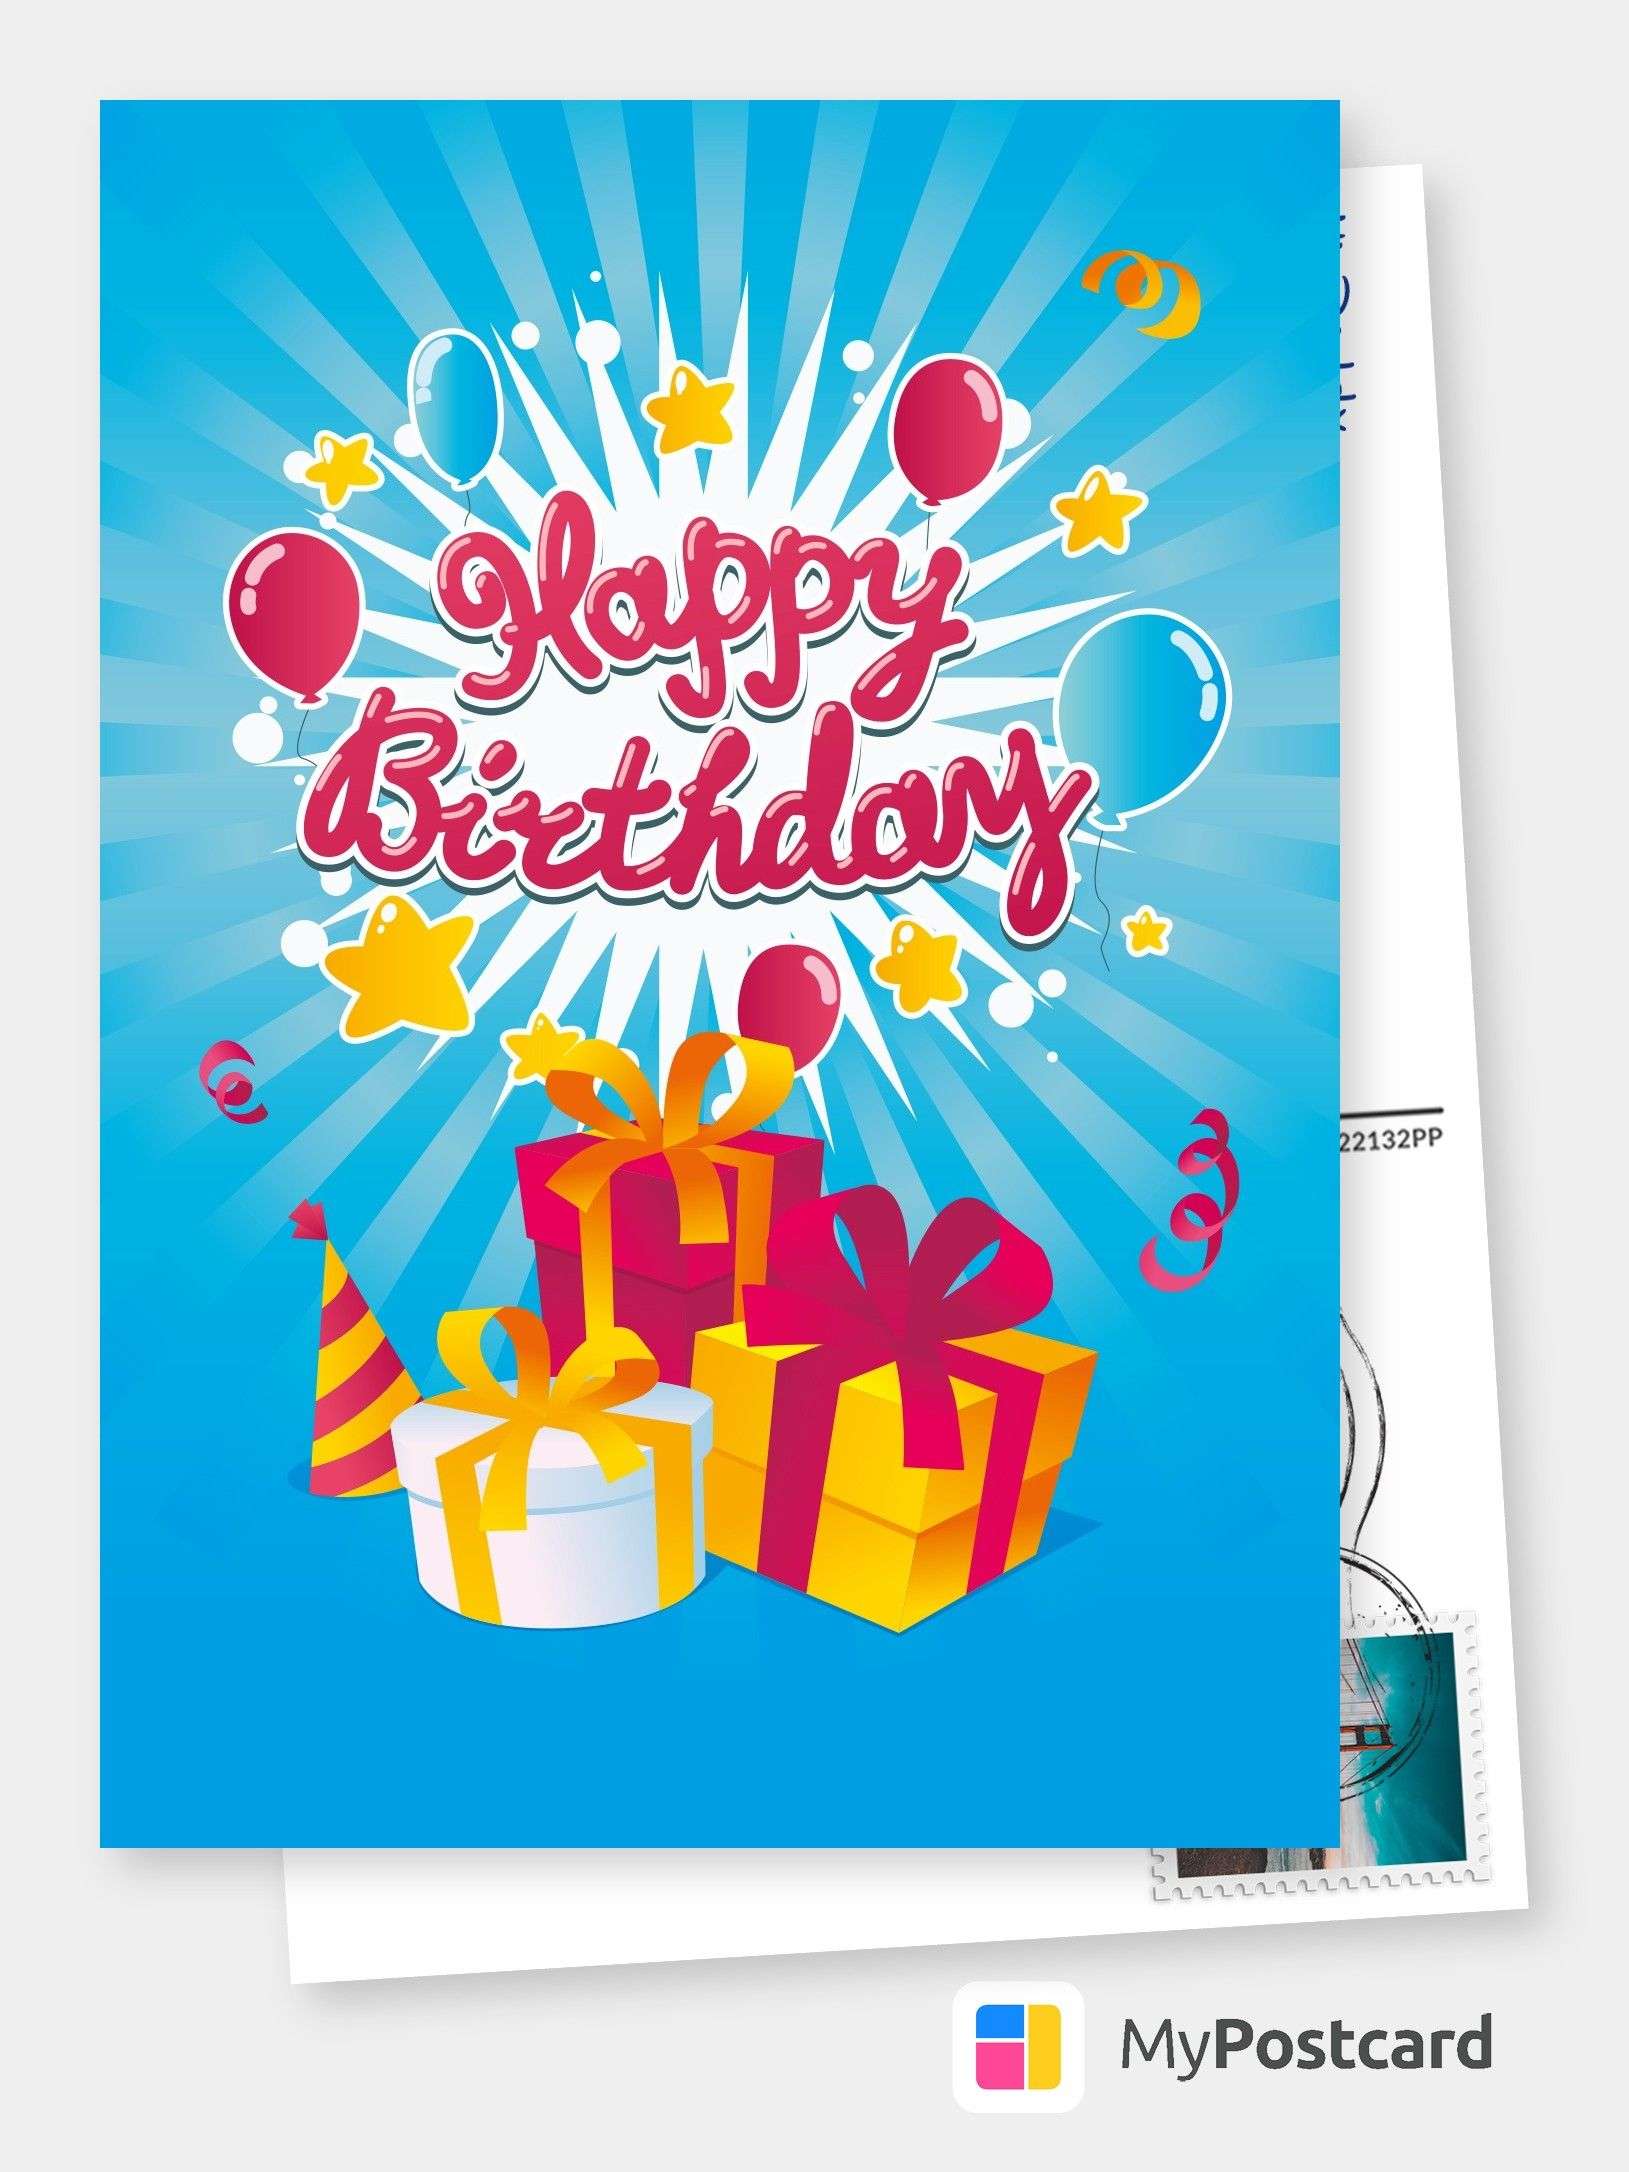 Create Your Own Happy Birthday Cards